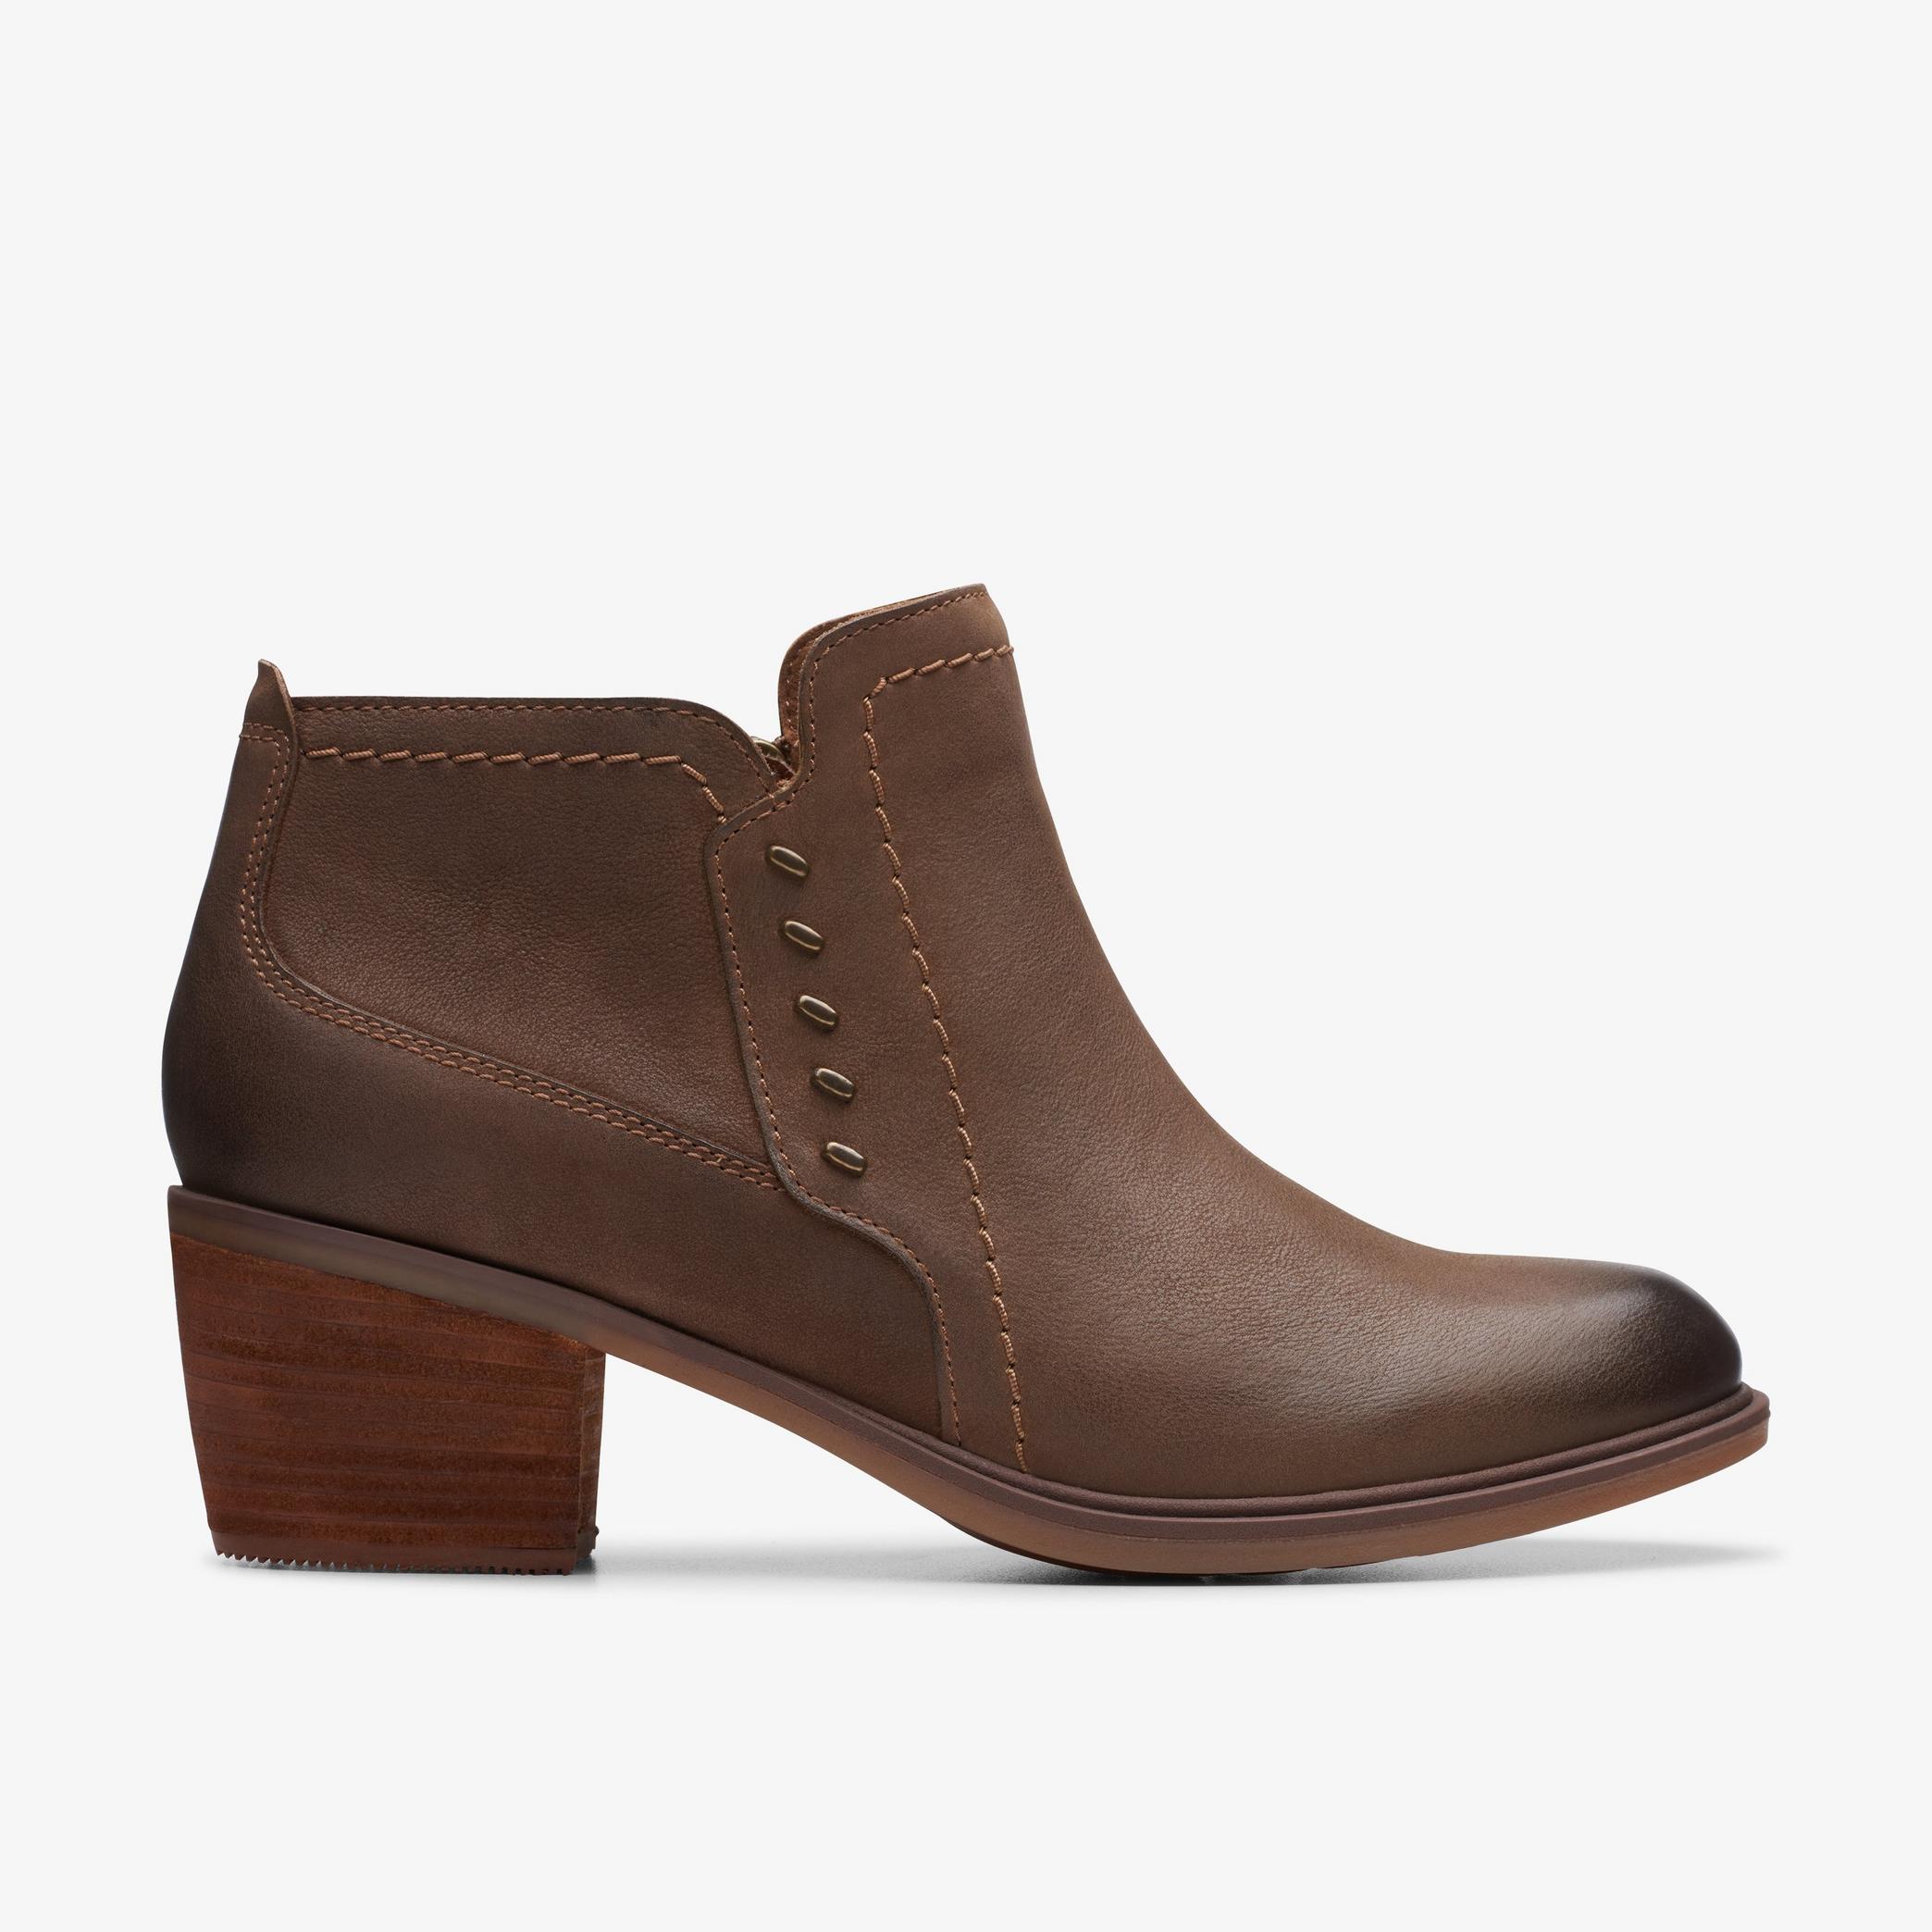 WOMENS Neva Lo Dark Tan Leather Ankle Boots | Clarks US